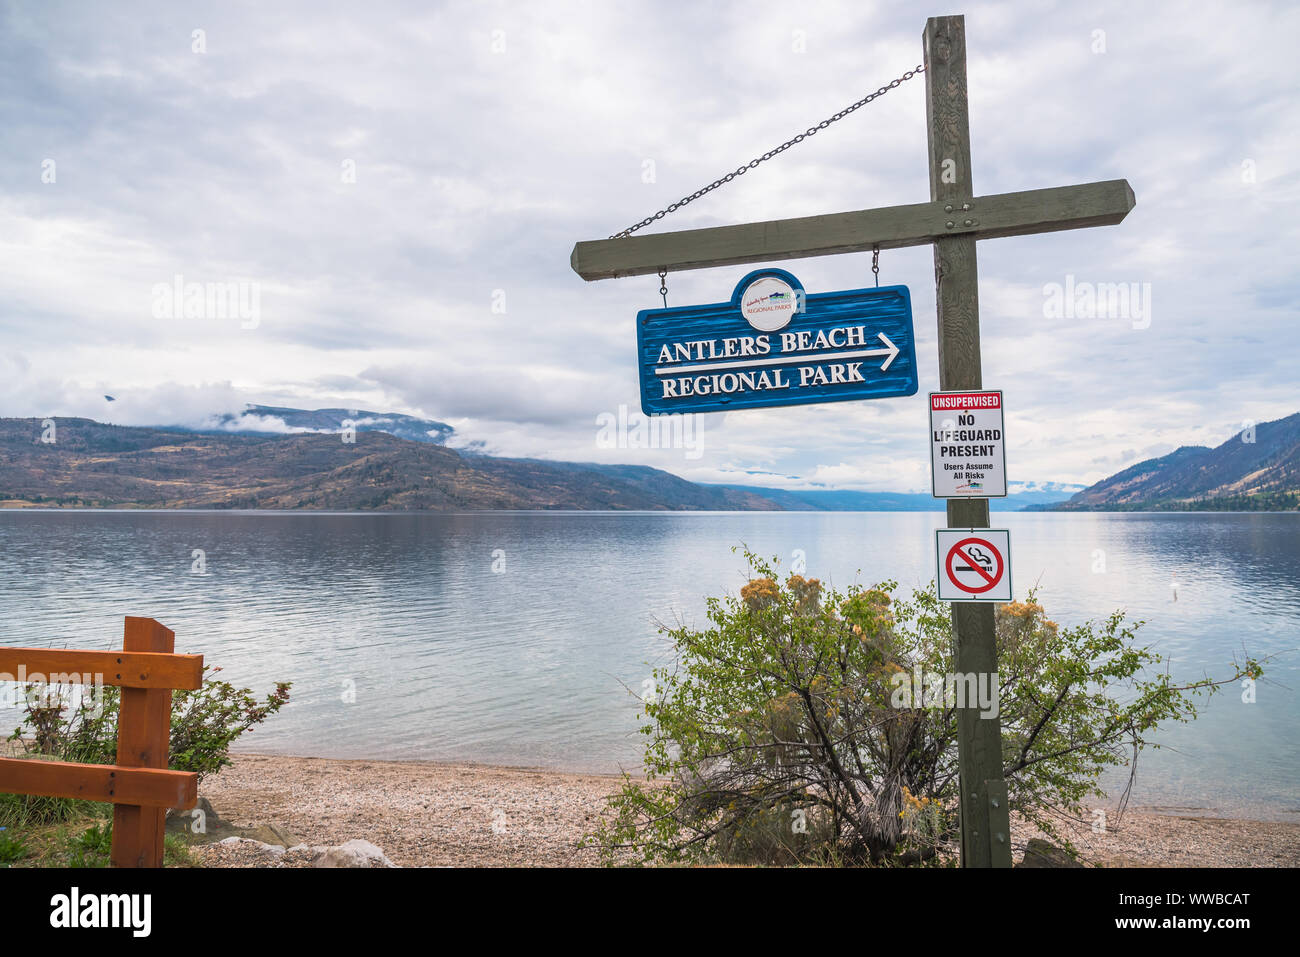 Peachland, British Columbia, Canada - September 8, 2019: Antlers Beach Regional Park is a popular public beach located near Hardy Falls on highway 97. Stock Photo